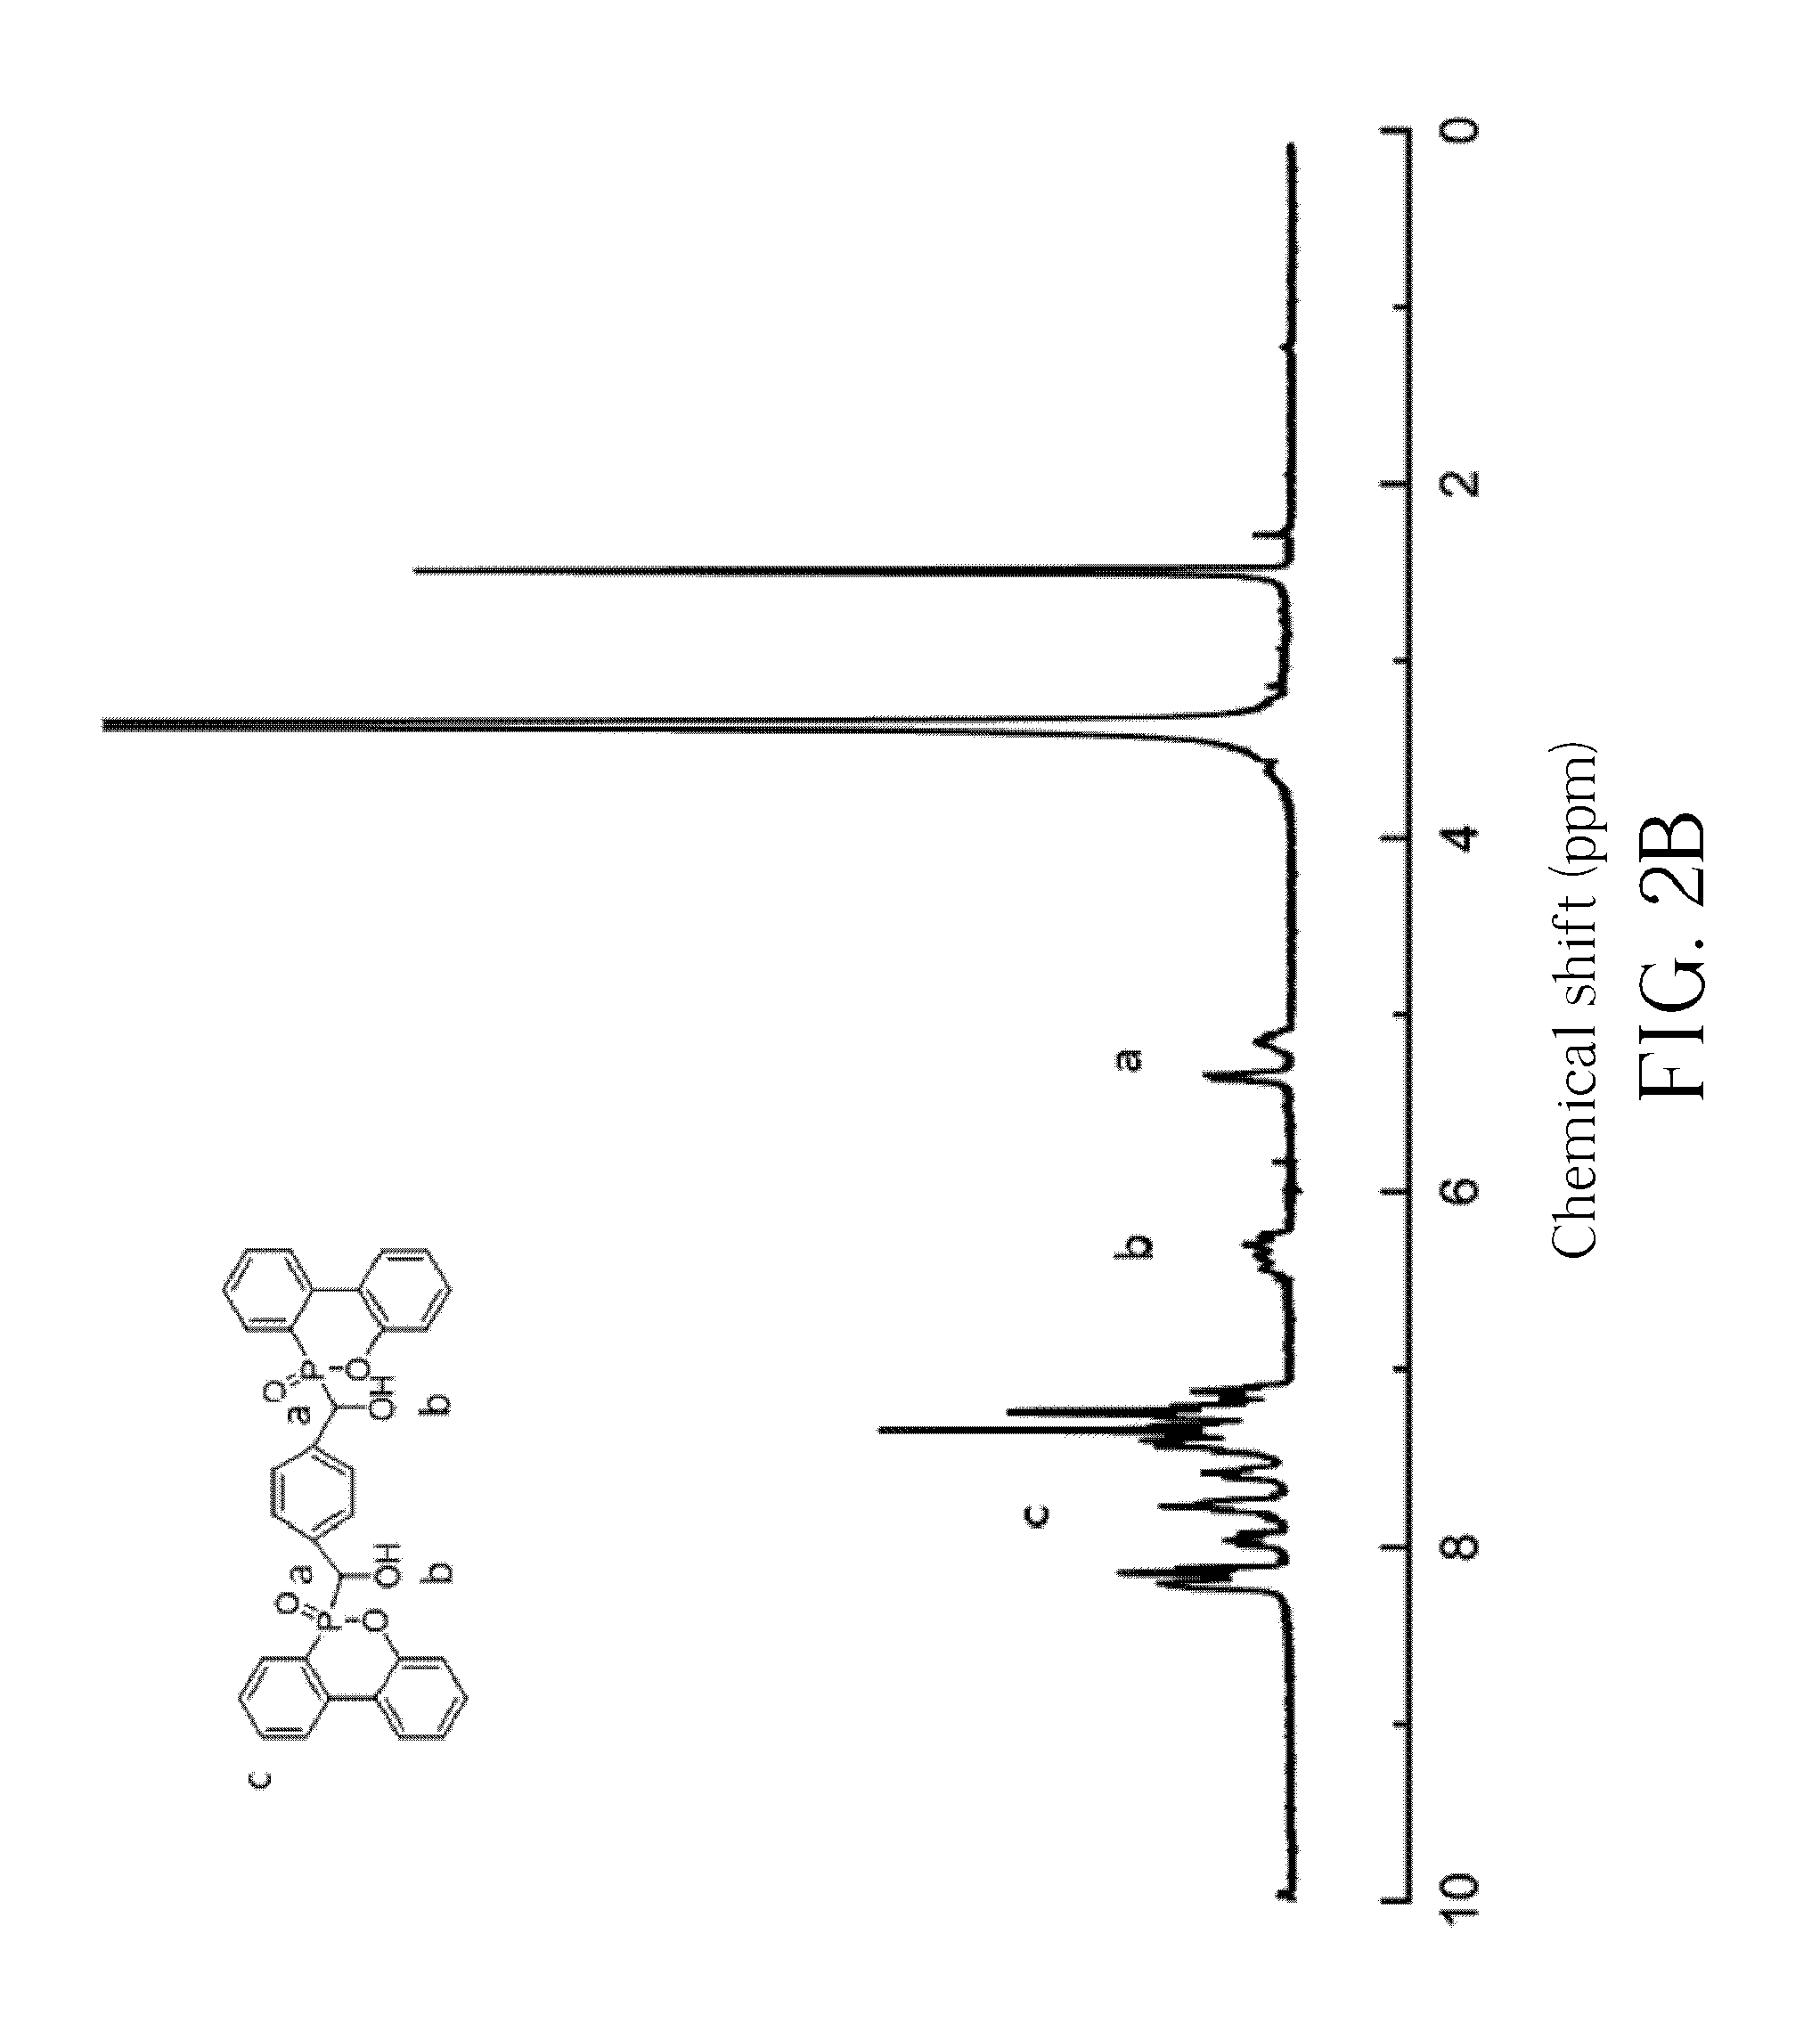 Phosphaphenanthrene-based compound and related preparation method and application